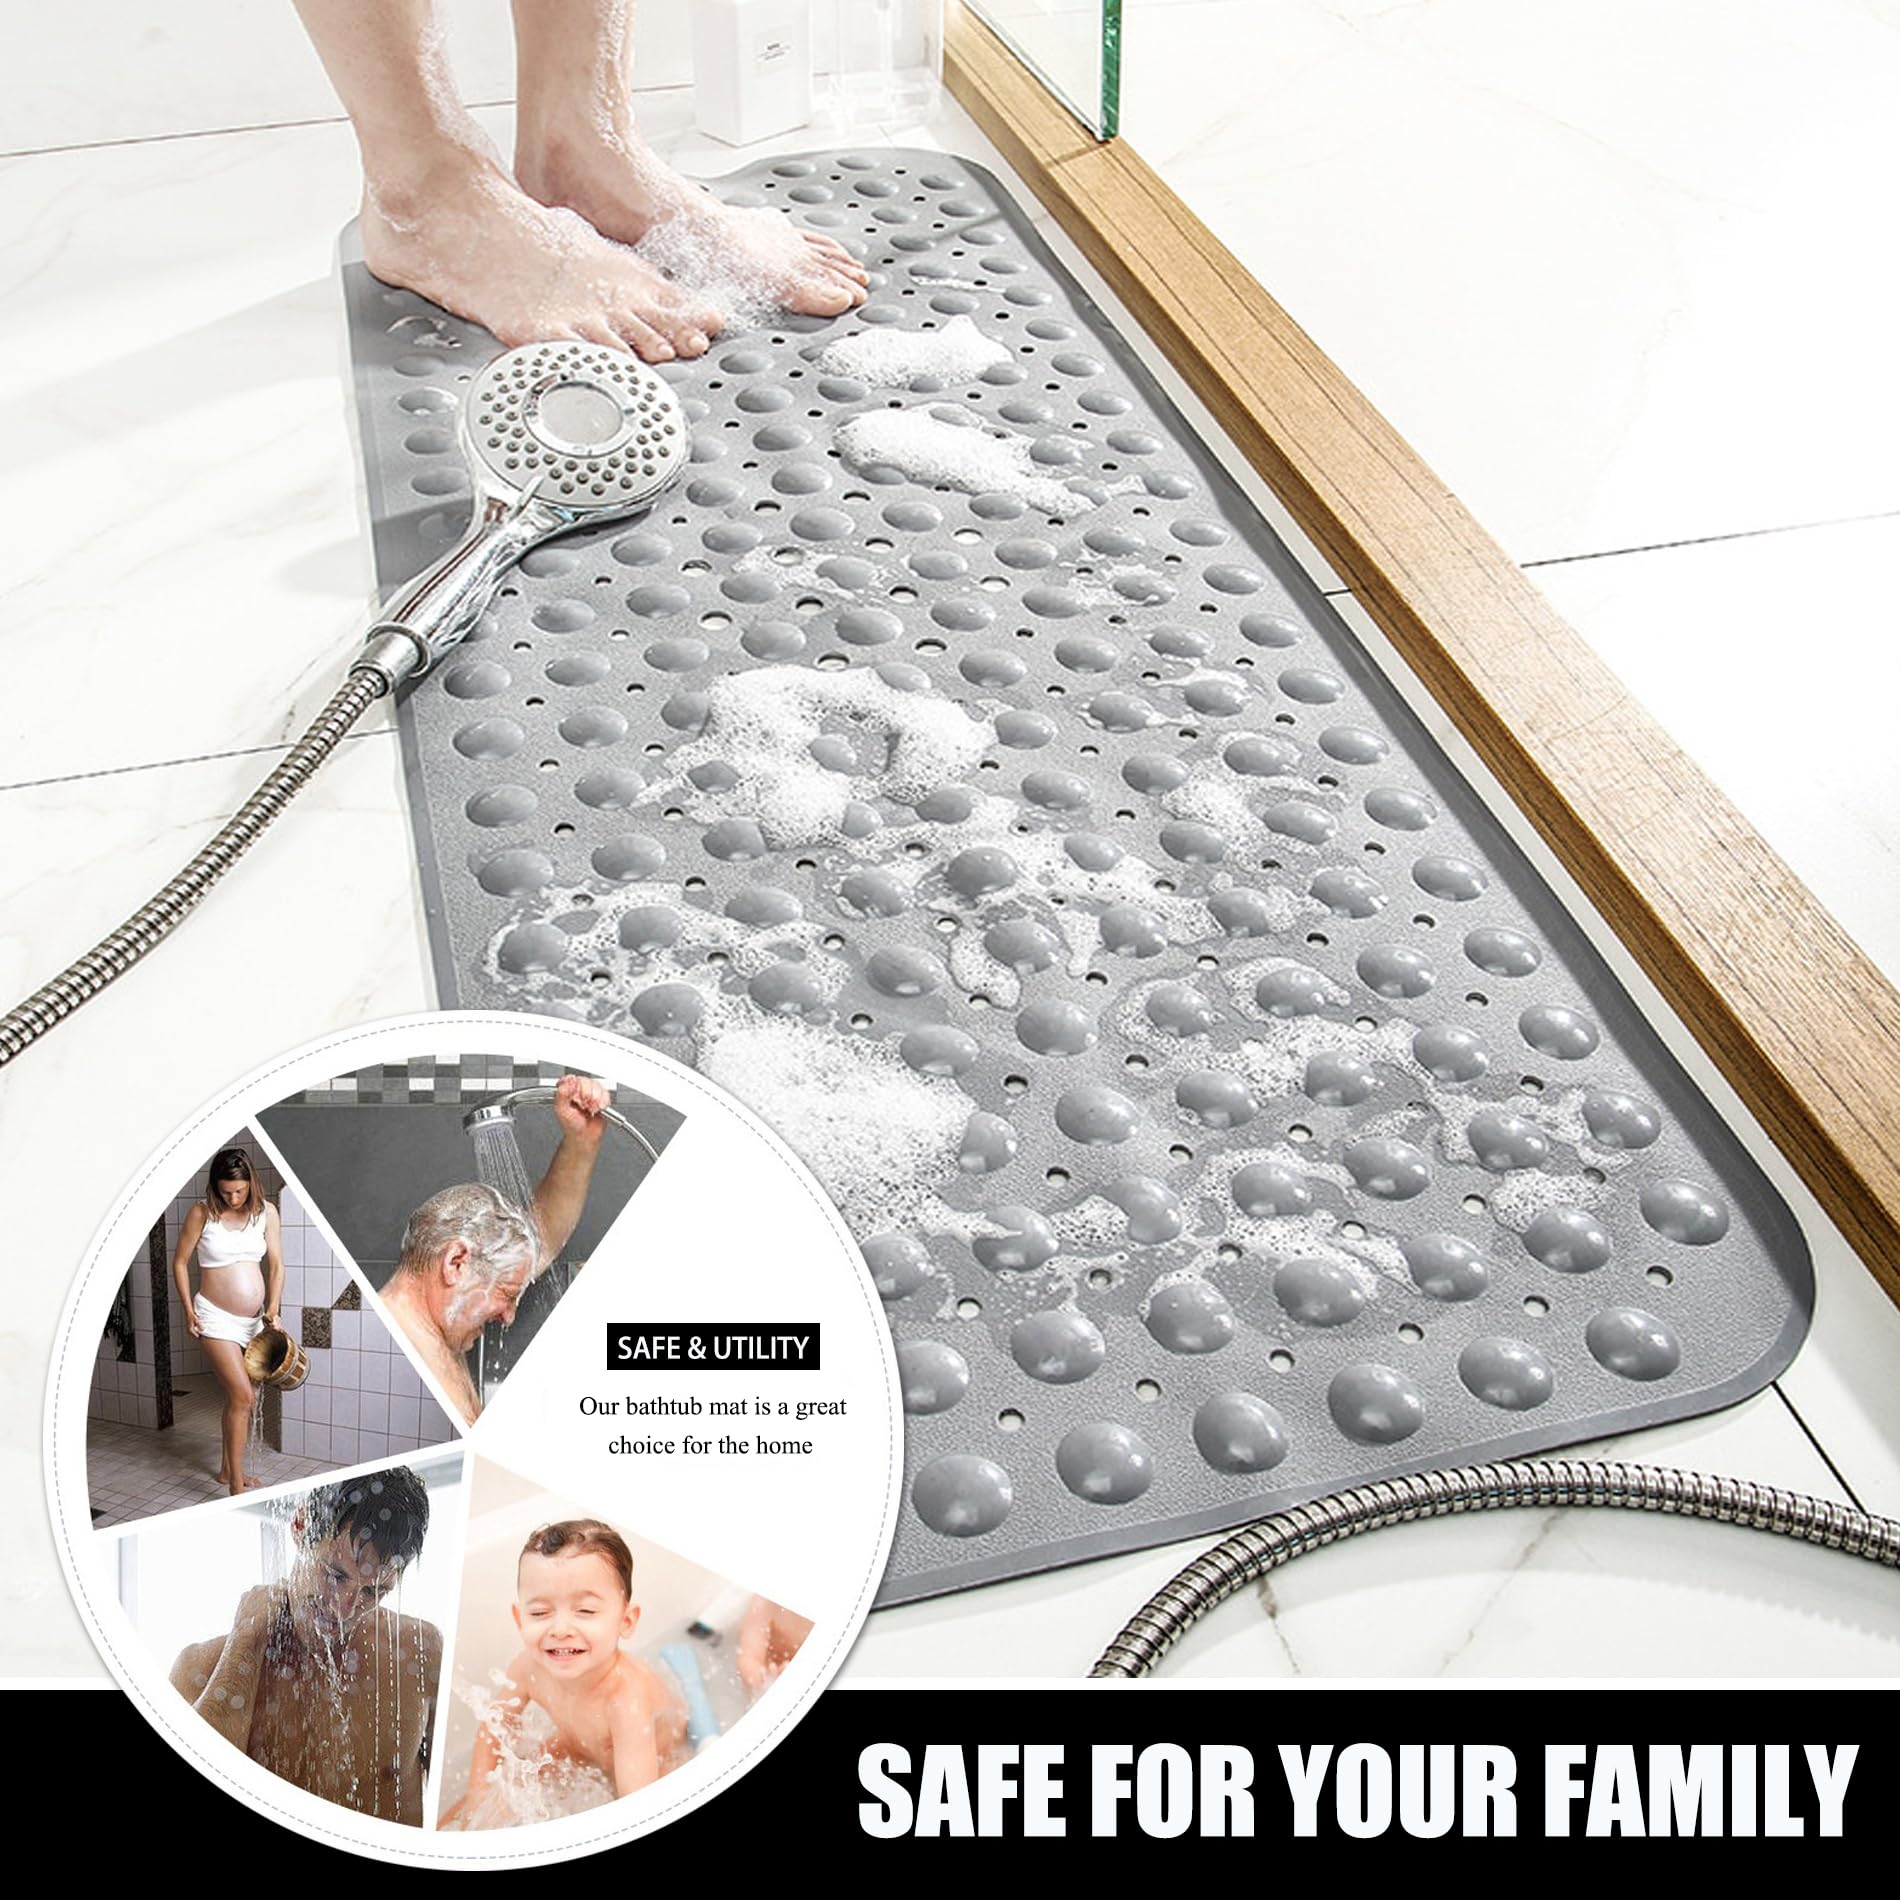 Large Non Slip Bathtub Mat, Extra Long Bath Mat for Tub, 40 x 16 Inch, Machine Washable Shower Mats with Suction Cups and Drain Holes, Bath Tub Mats for Bathroom Non Slip, Grey